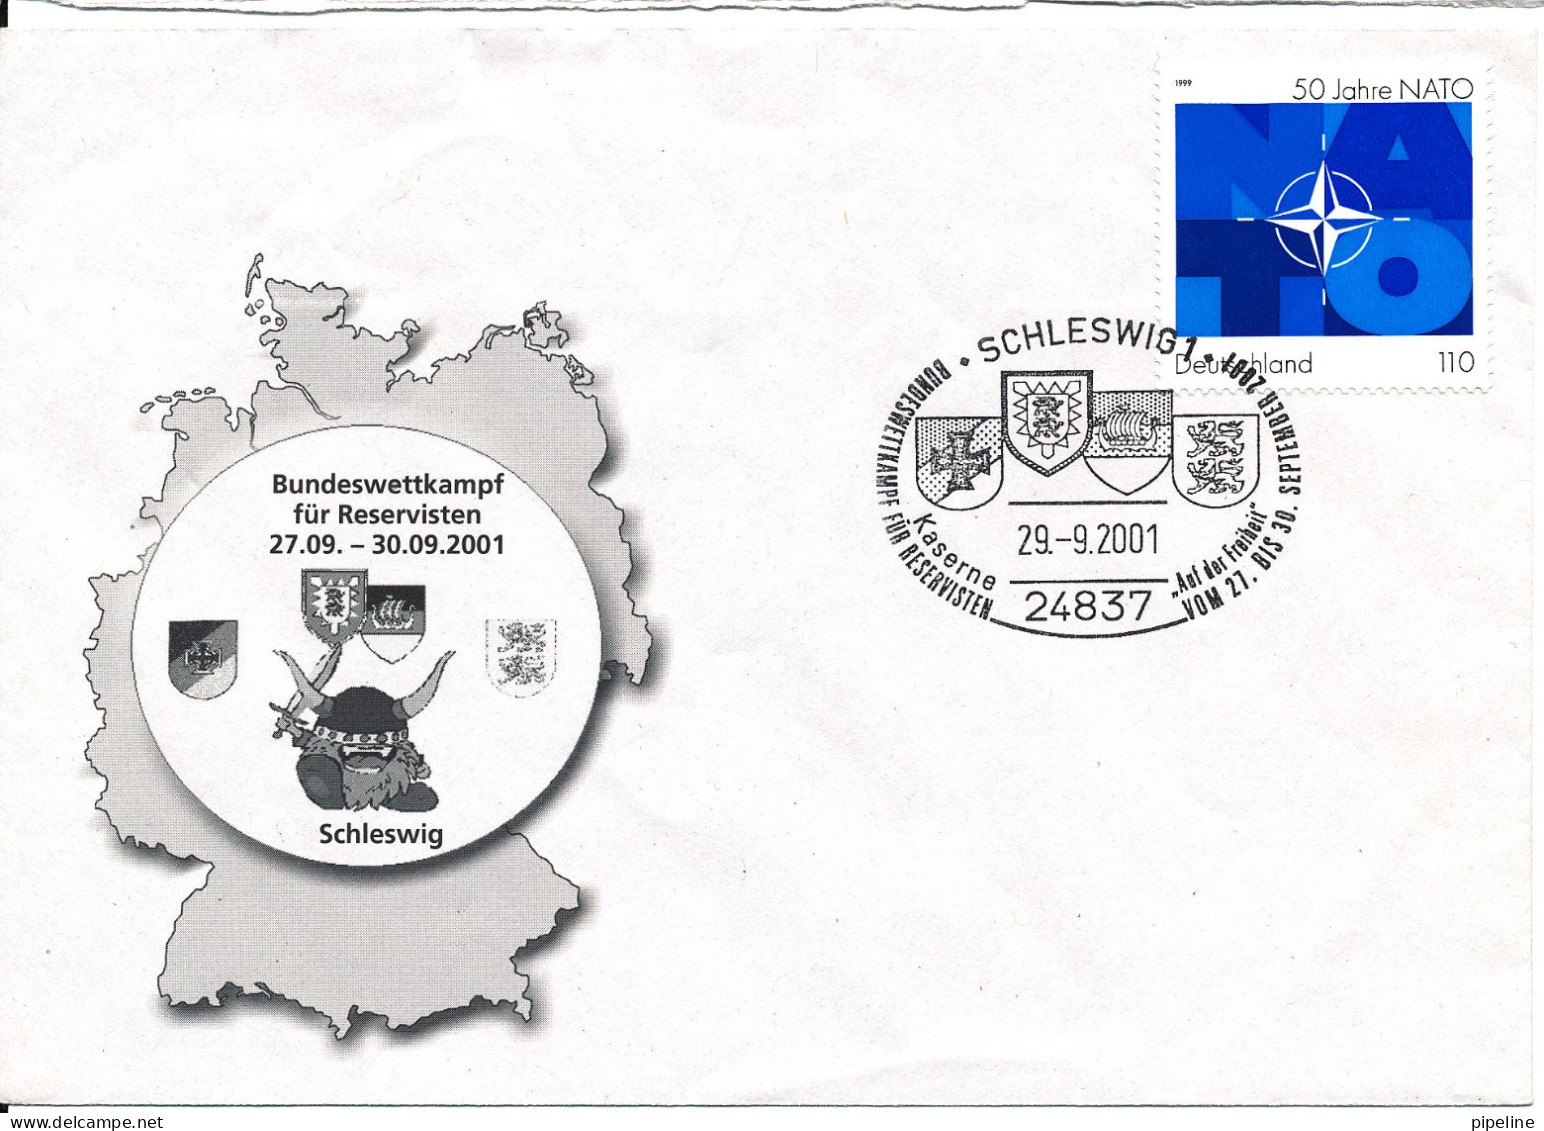 Germany Nice Cover With NATO Stamp 29-9-2001 With Cachet - NATO